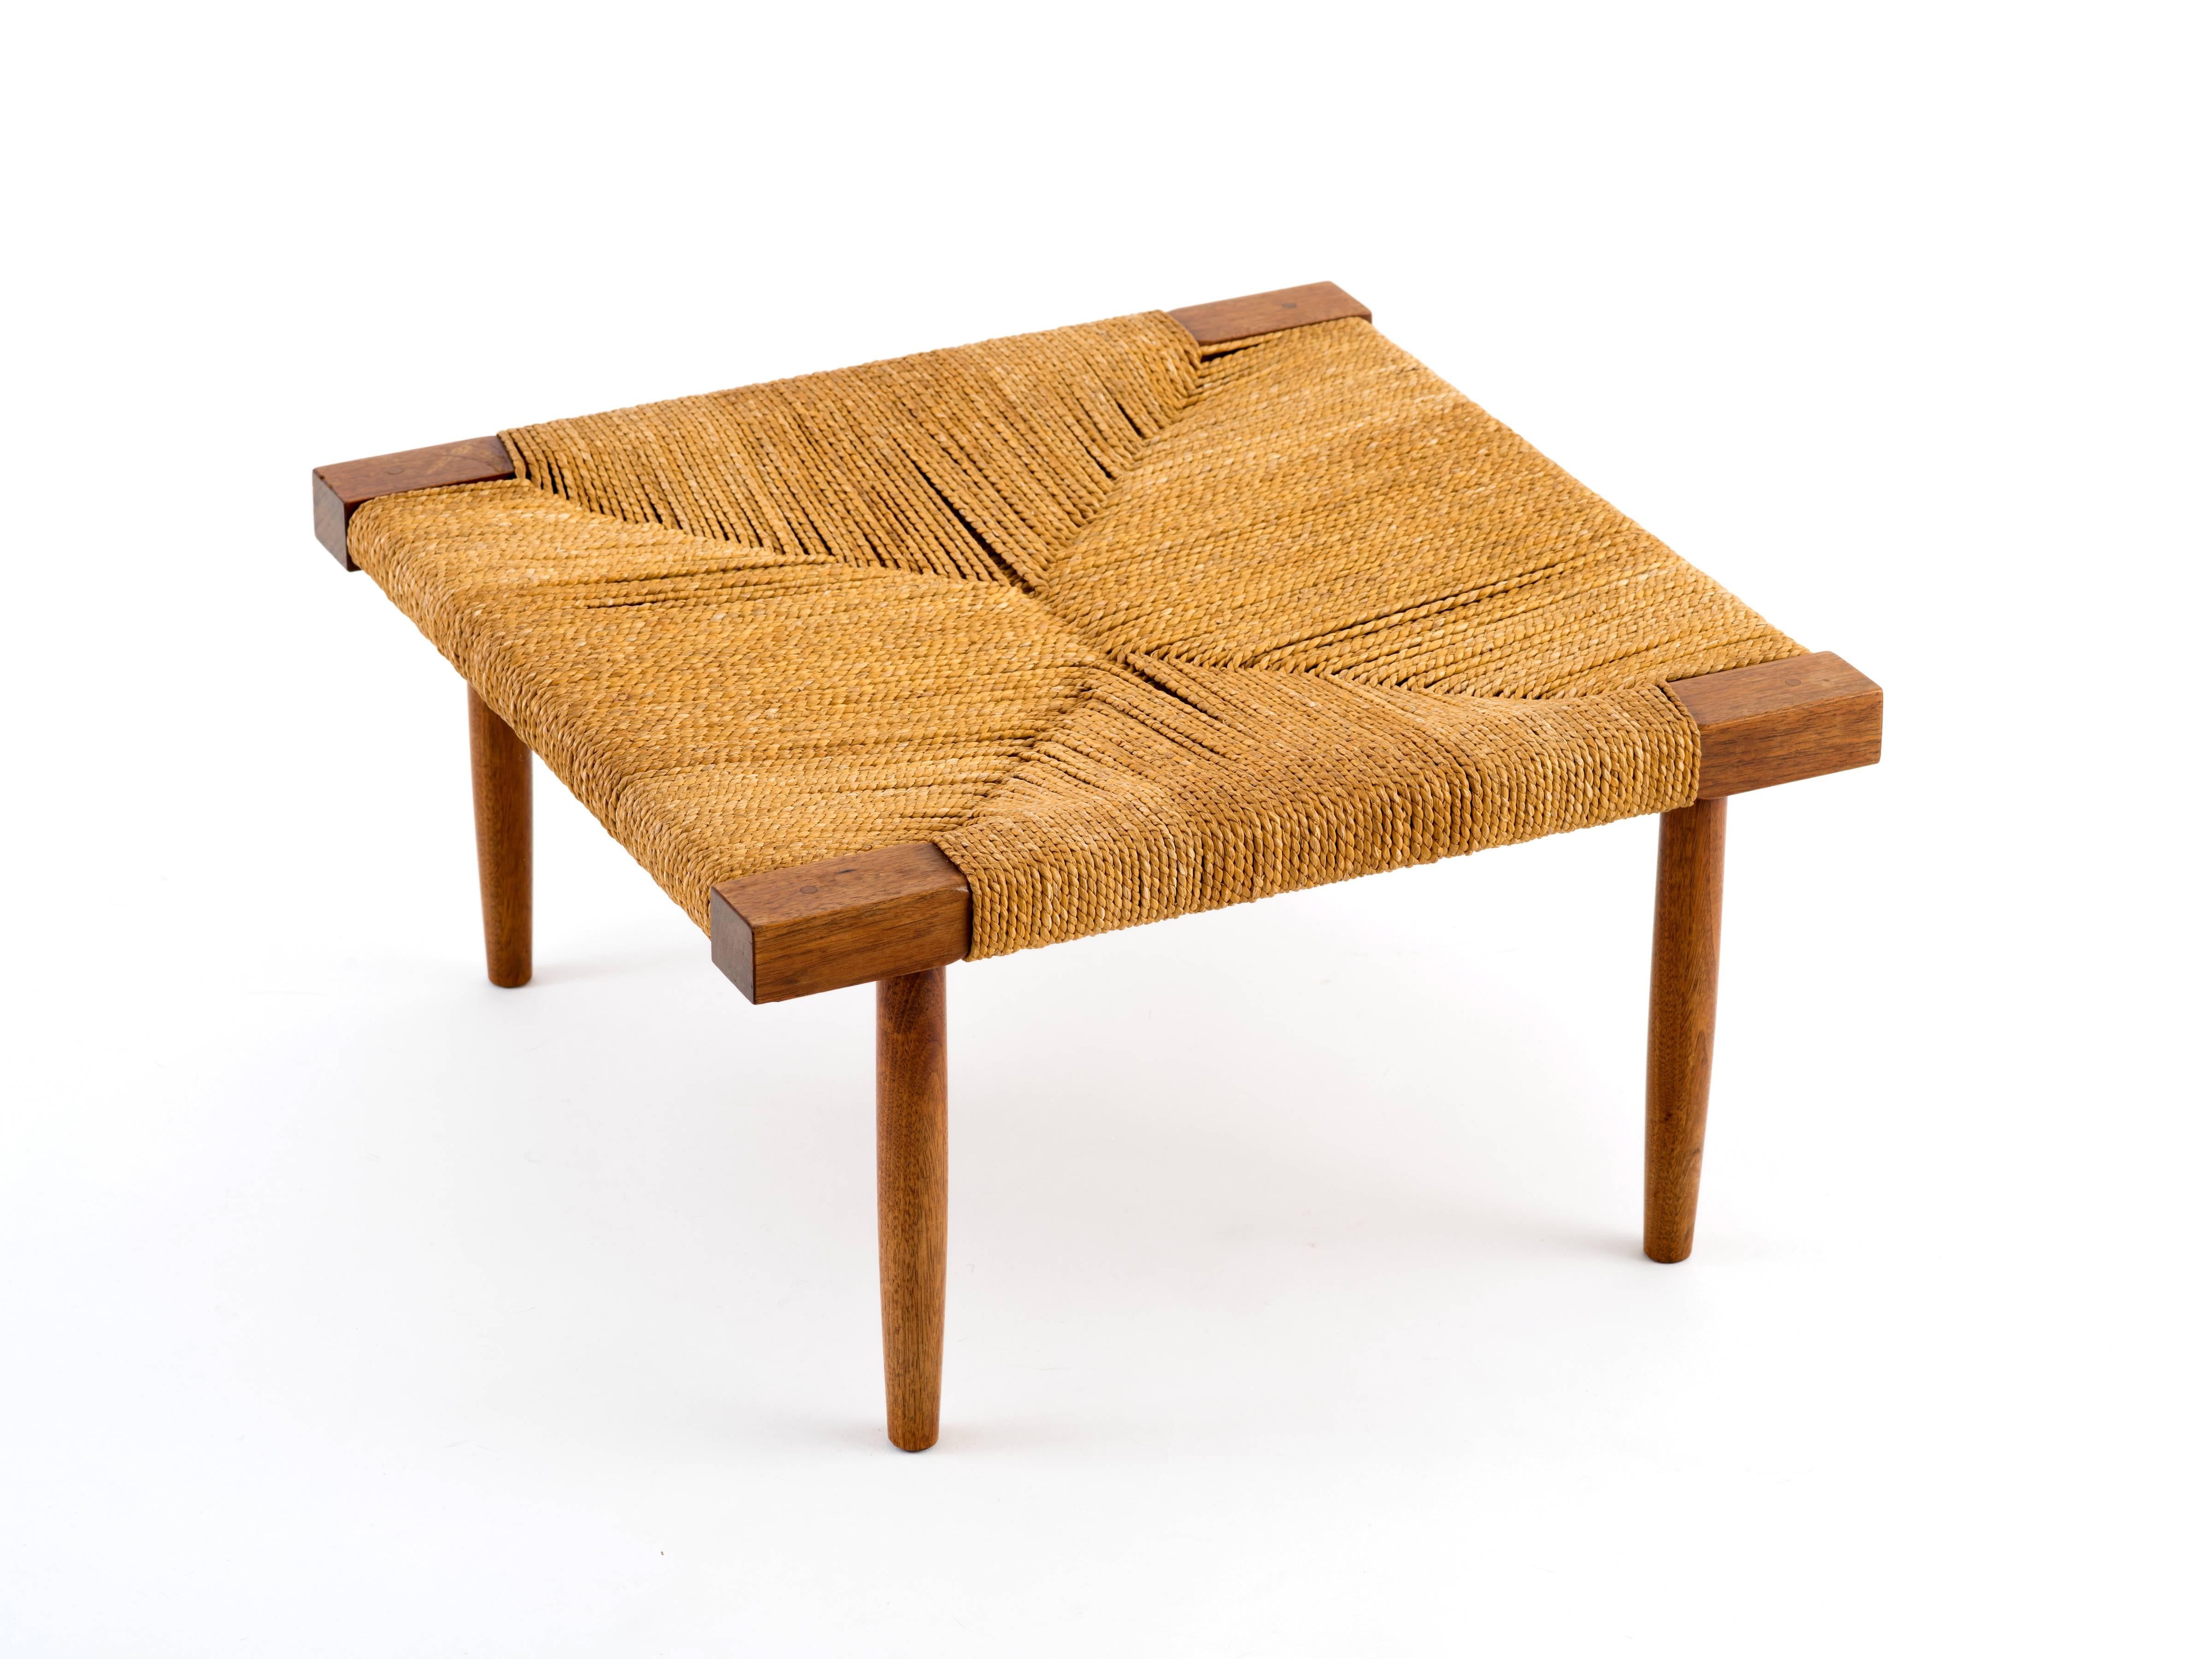 A low stool or ottoman in walnut with grass rope seat by George Nakashima, circa 1965. This design is both scarcer and larger than the more commonly-seen 12.5 inch height stool with splayed legs and it's in remarkable condition, particularly the